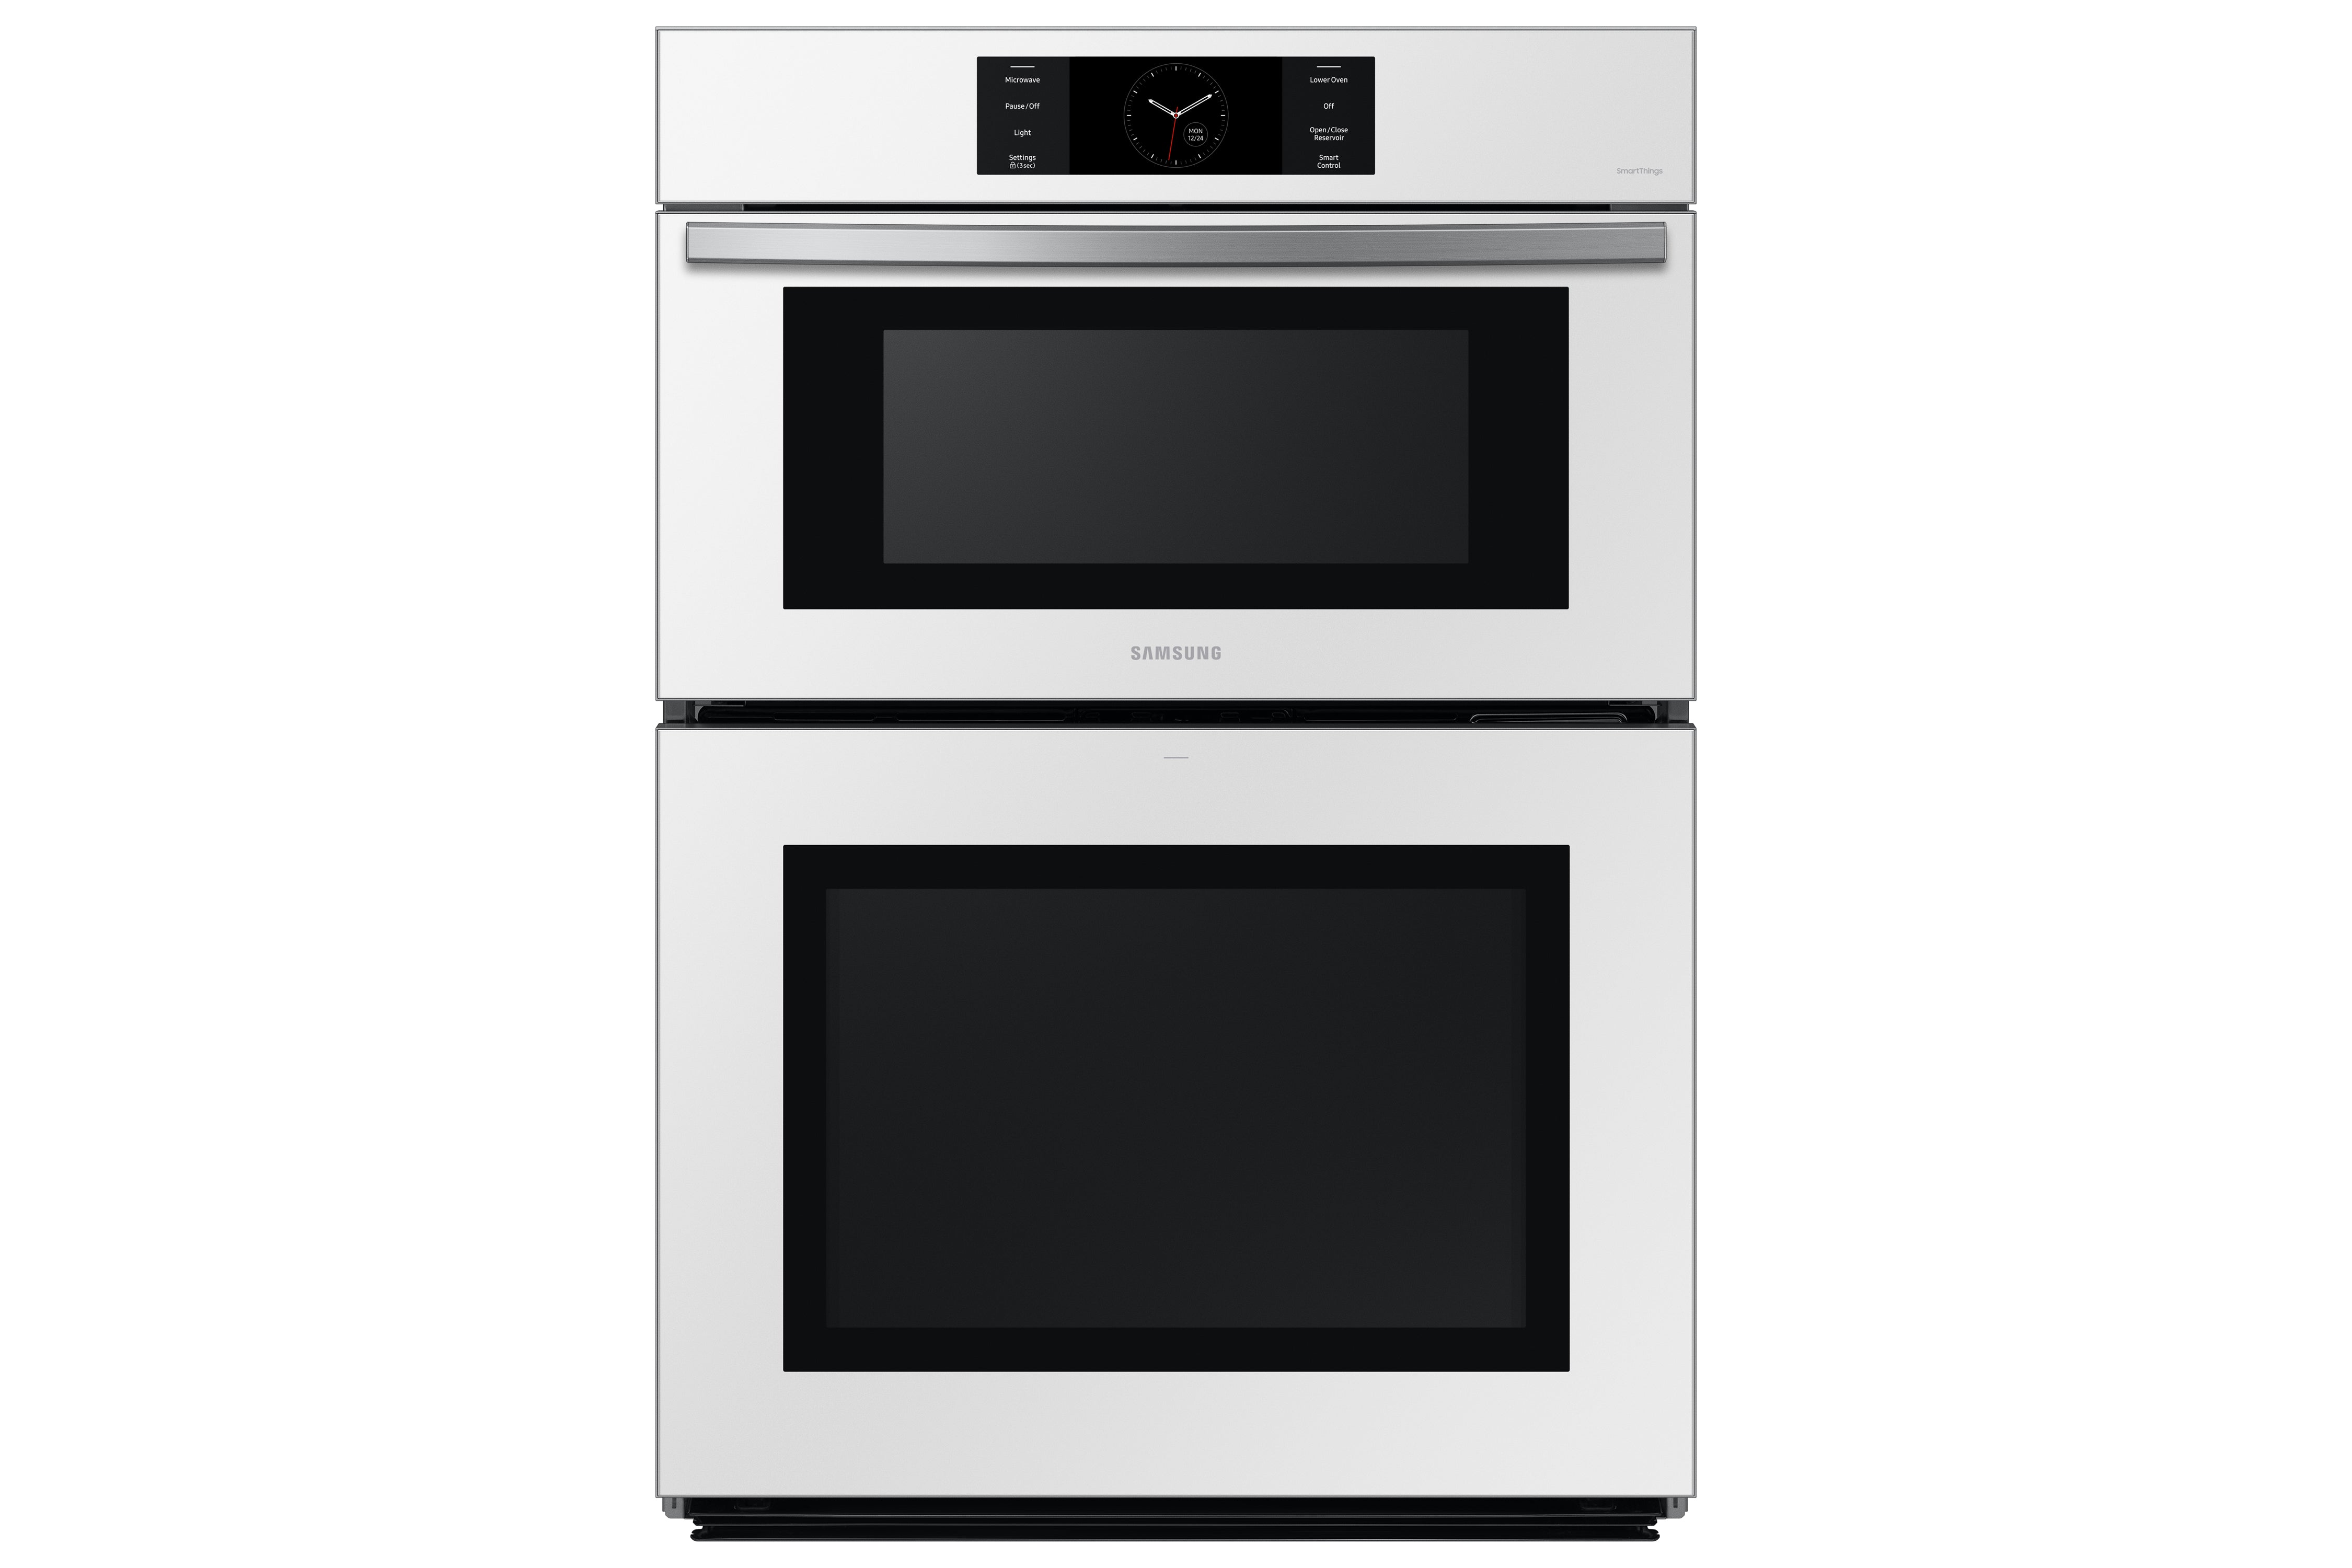 Samsung - 5.1 cu. ft Combination Wall Oven in White - NQ70CB700D12AA